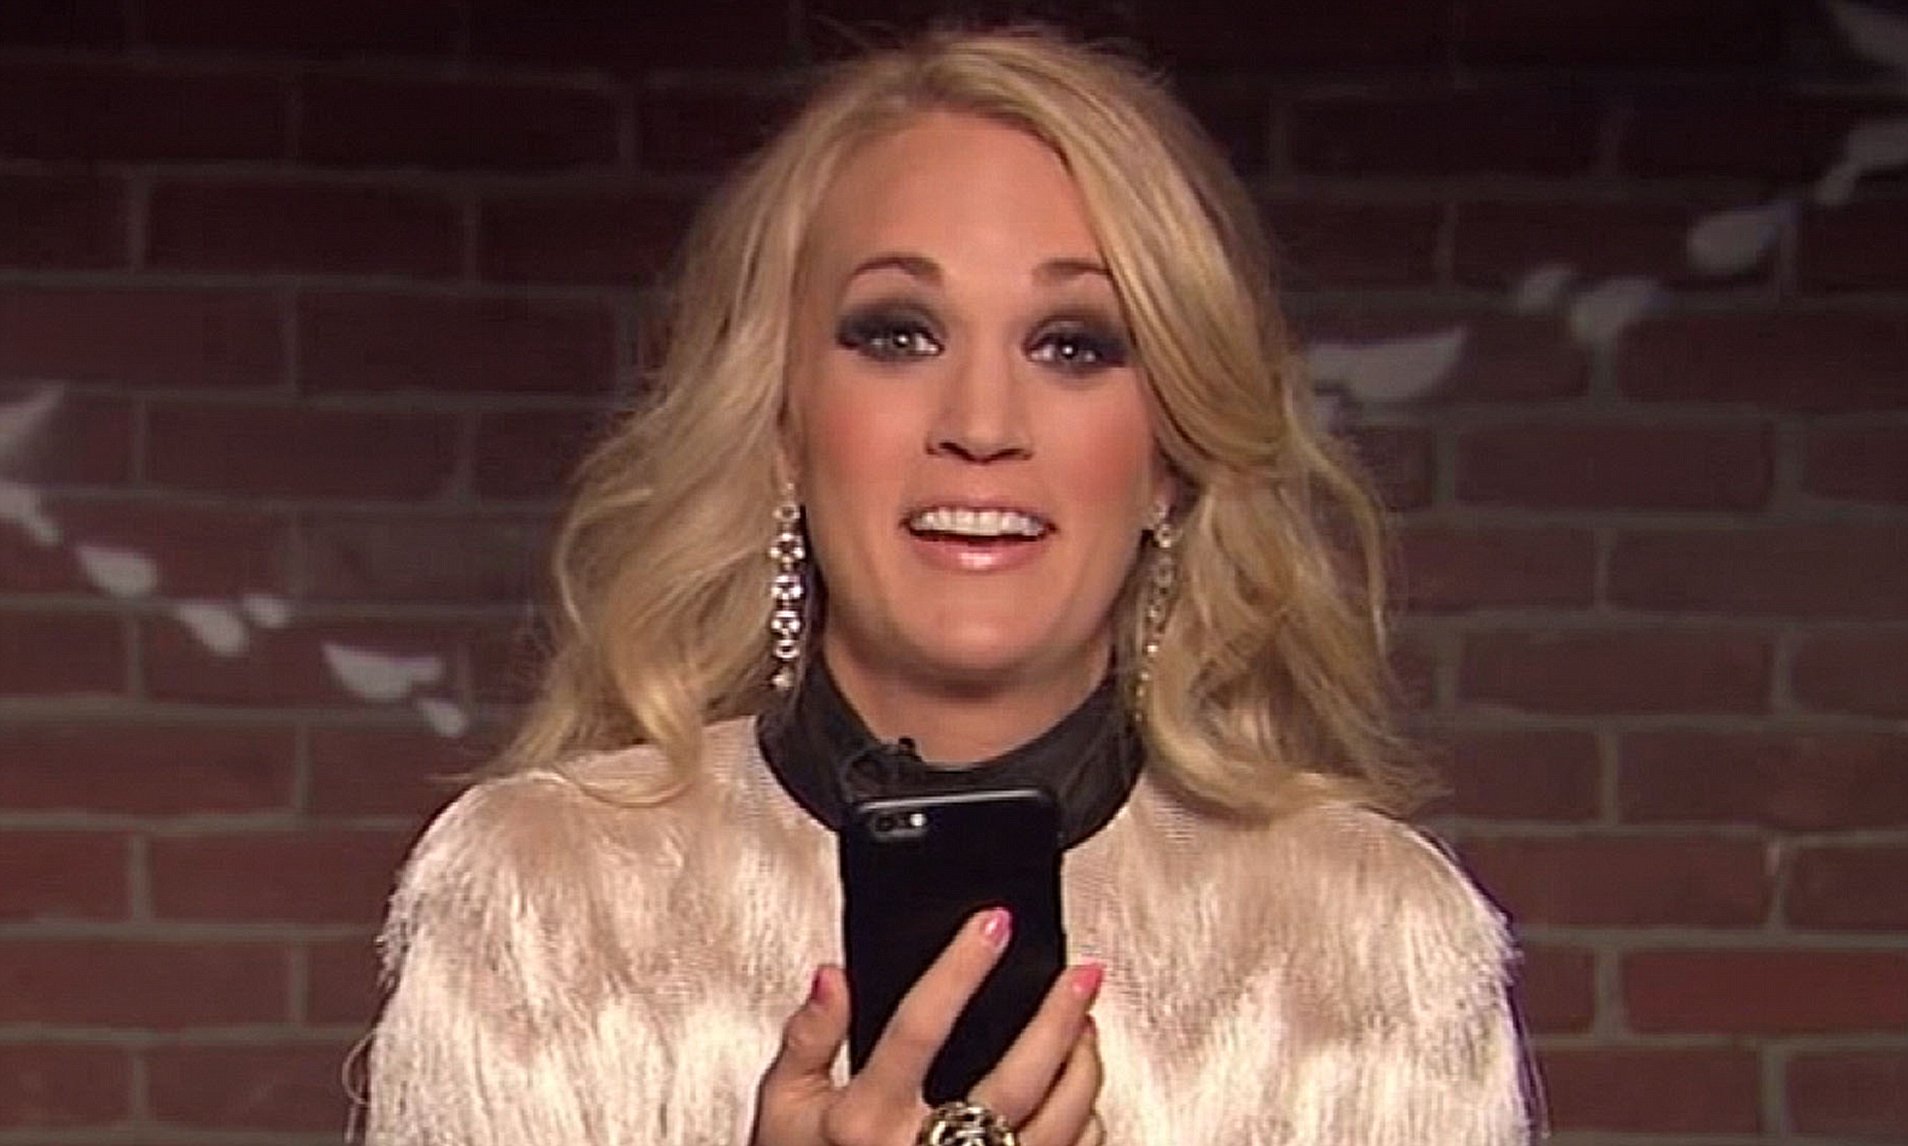 betty merrifield recommends carrie underwood crotch shot pic